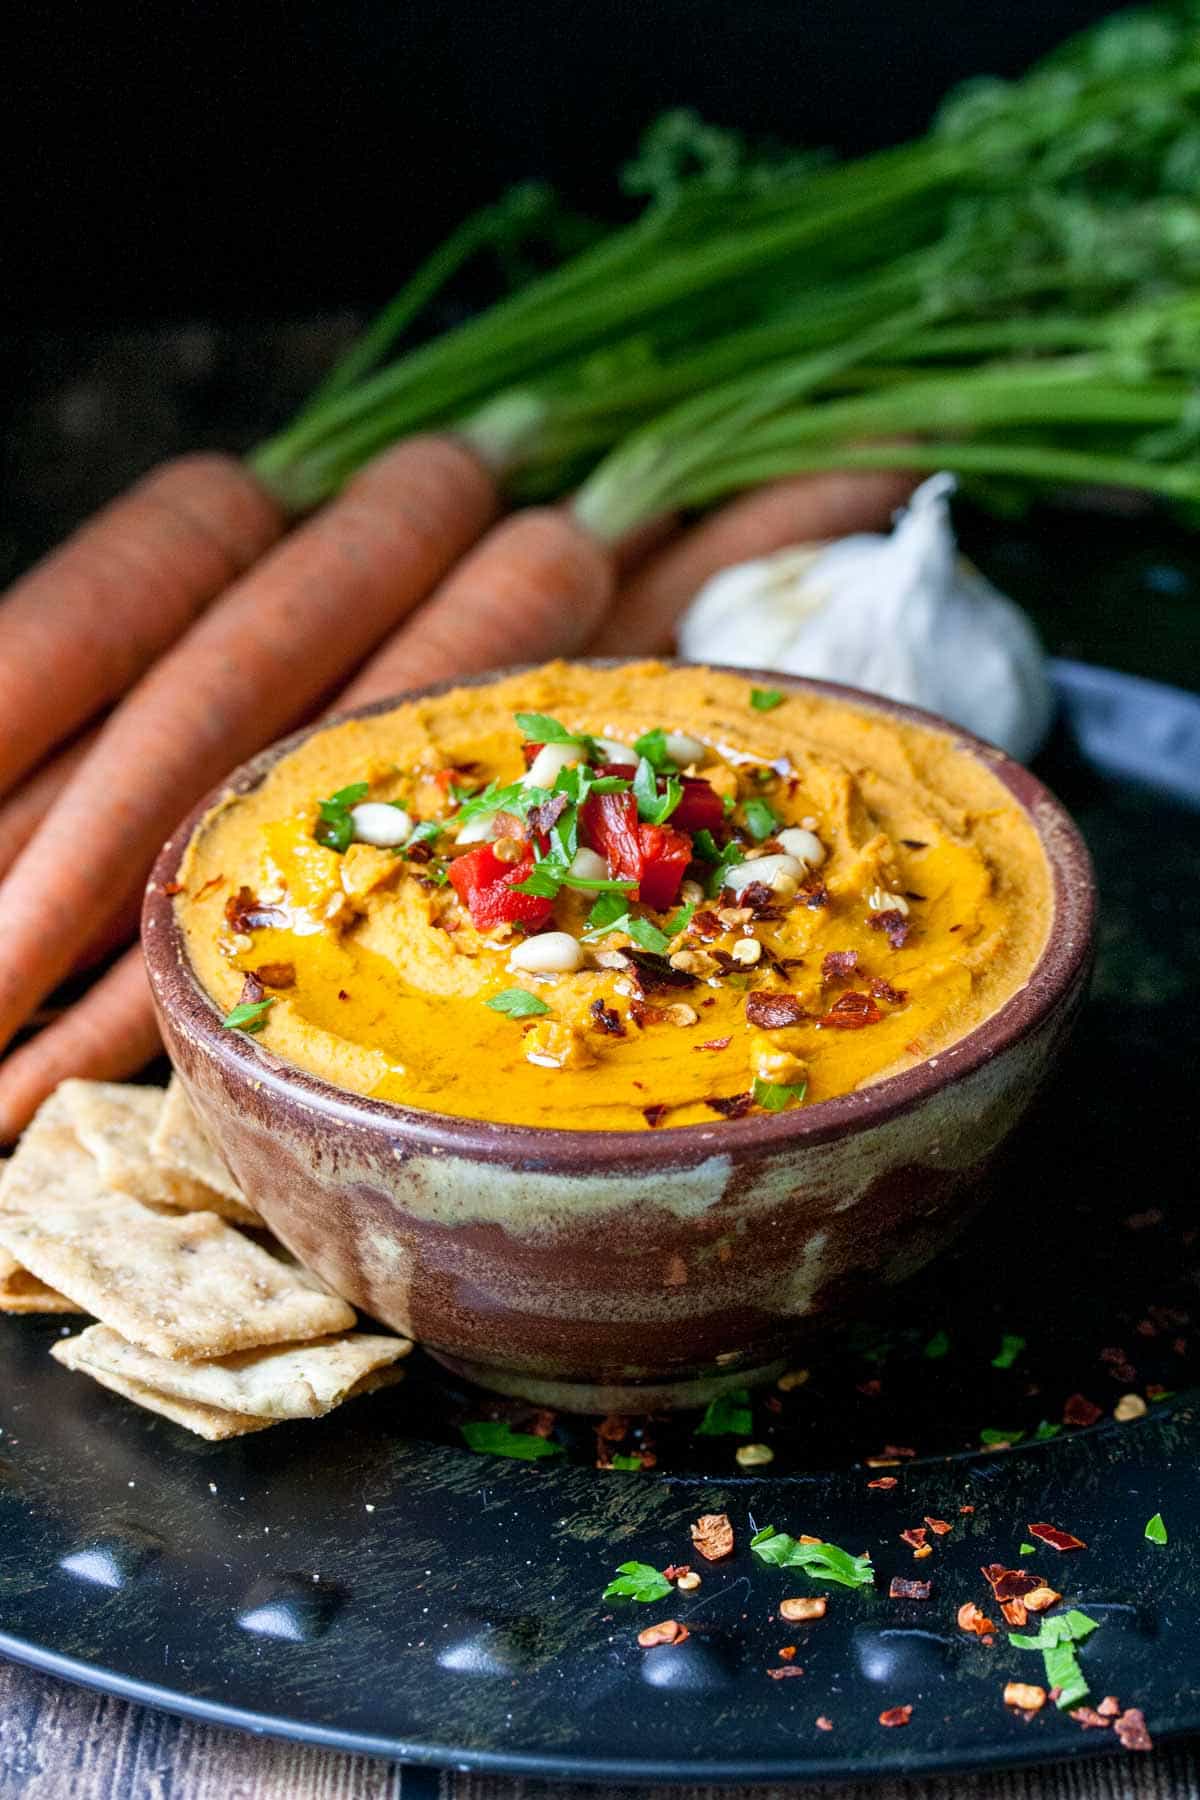 Front view of bowl of carrot hummus with garnishes